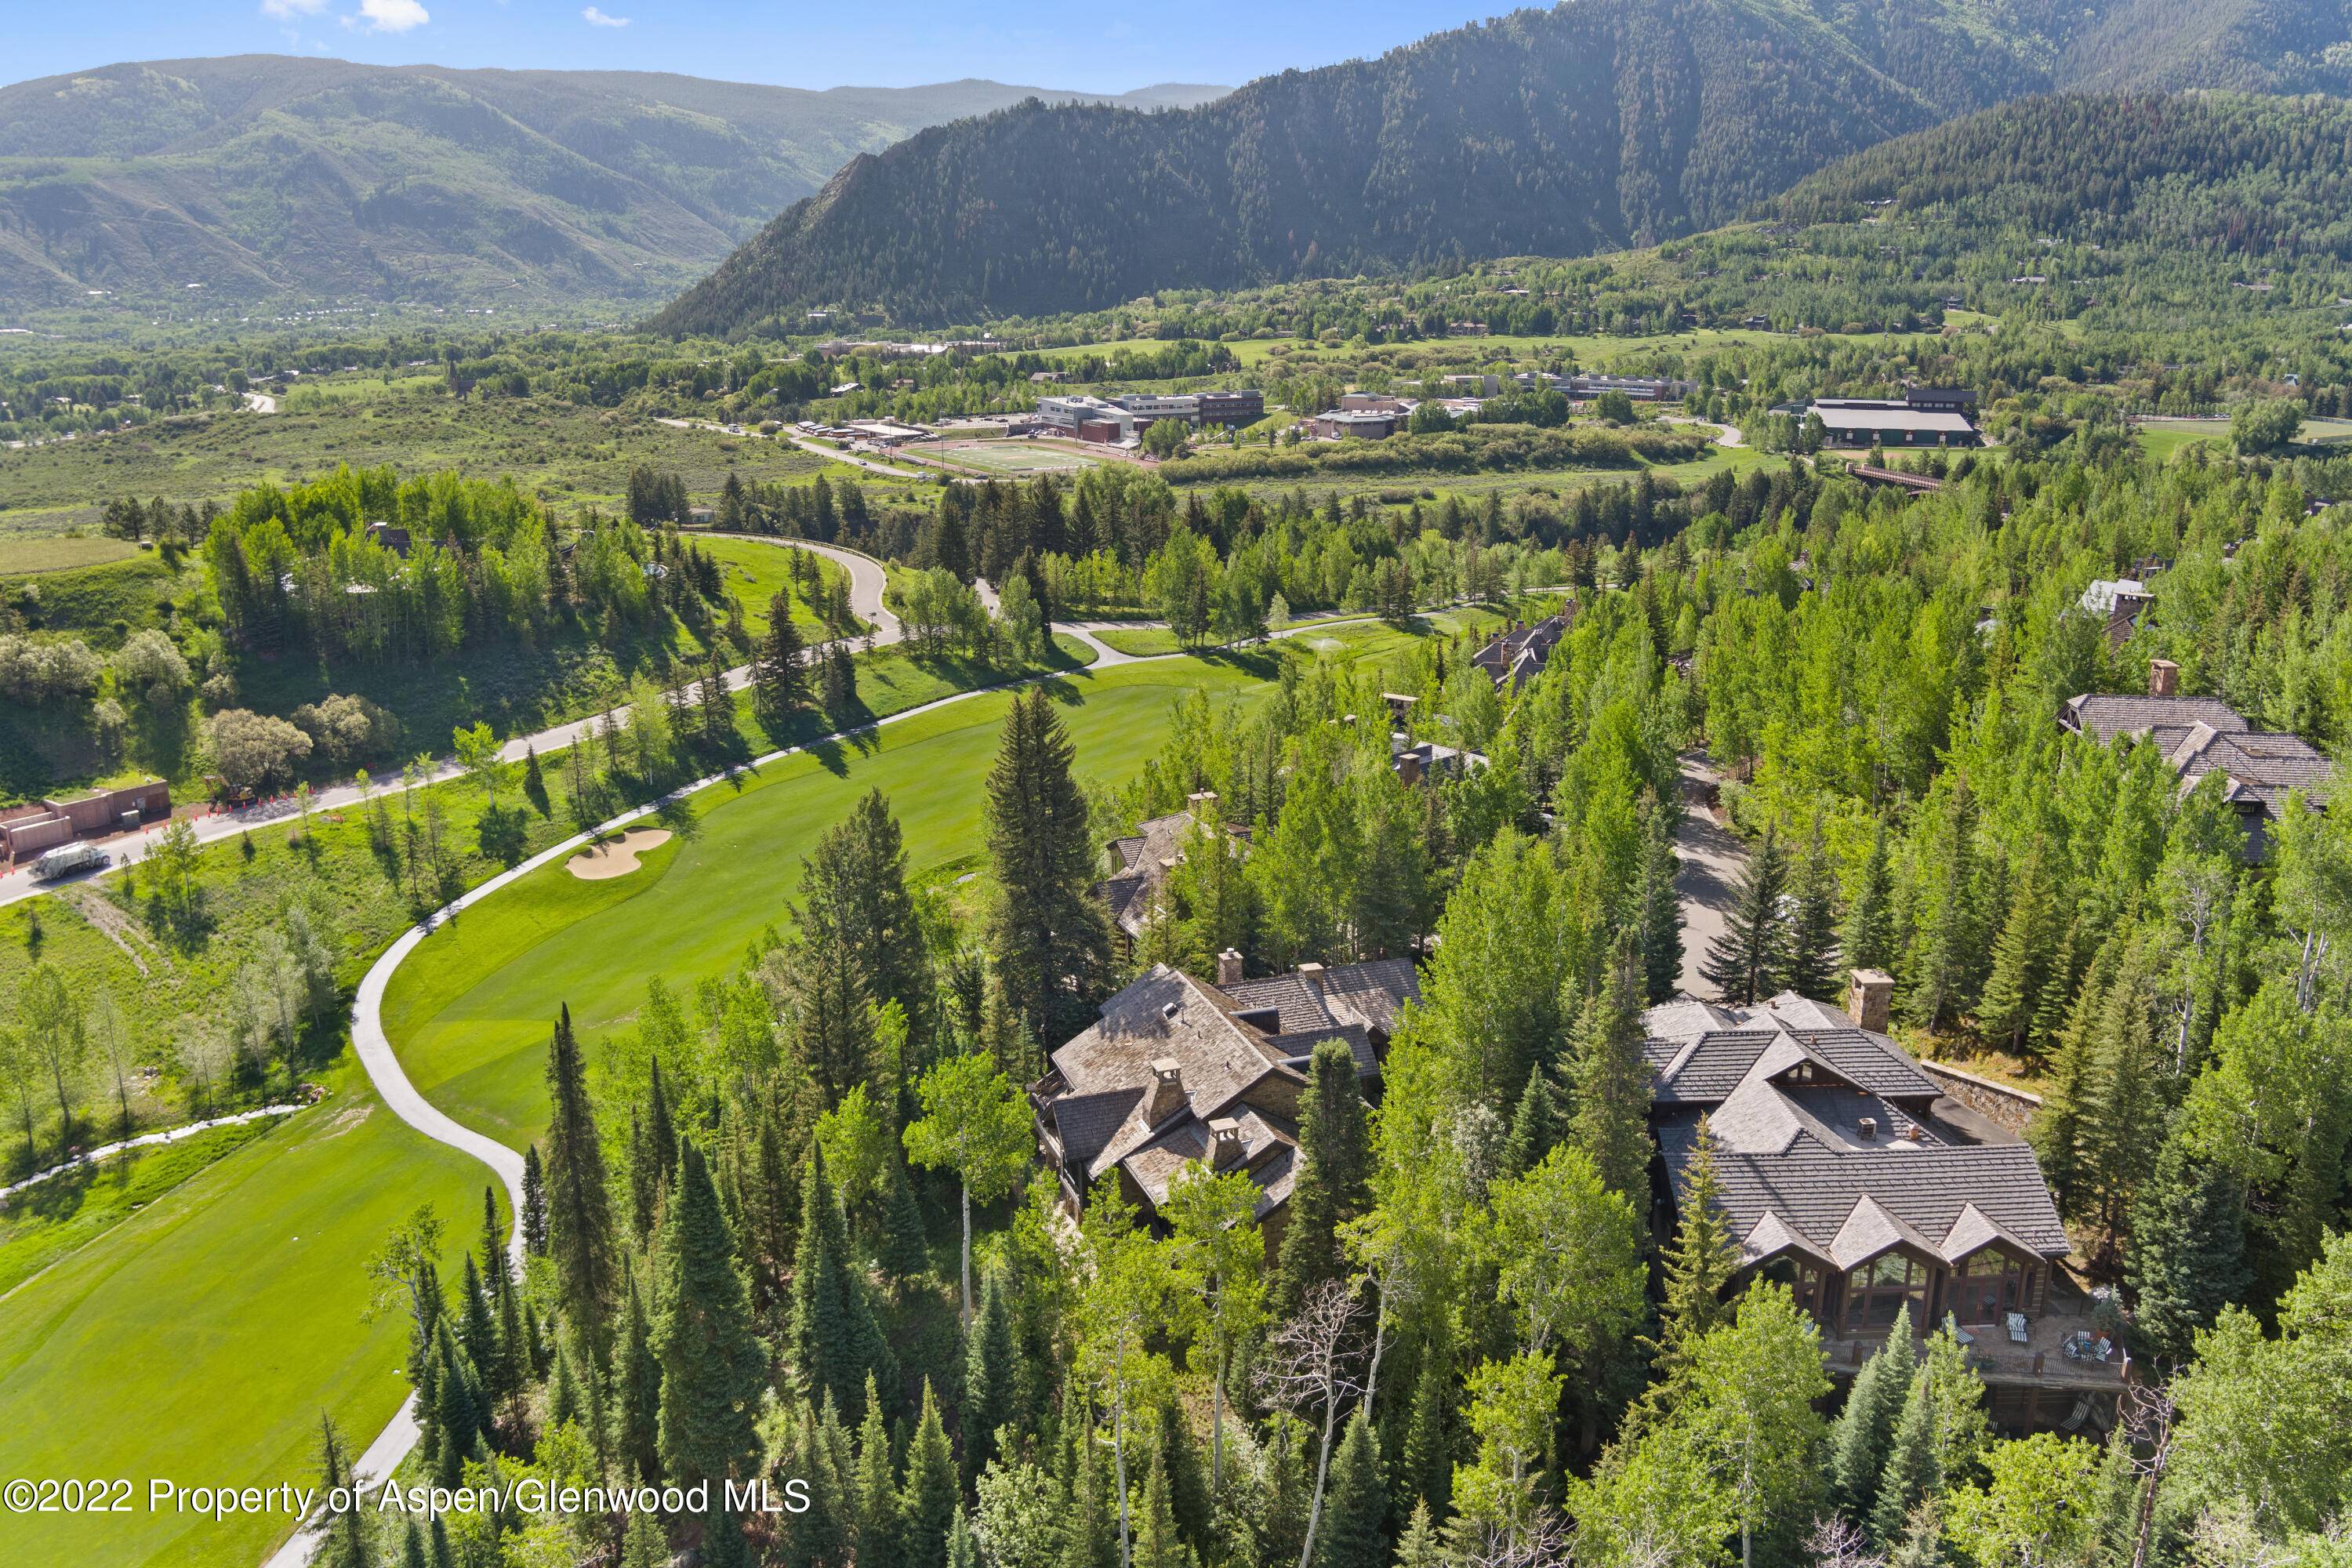 This is a great opportunity to purchase one of the last remaining home sites in the Maroon Creek Club.